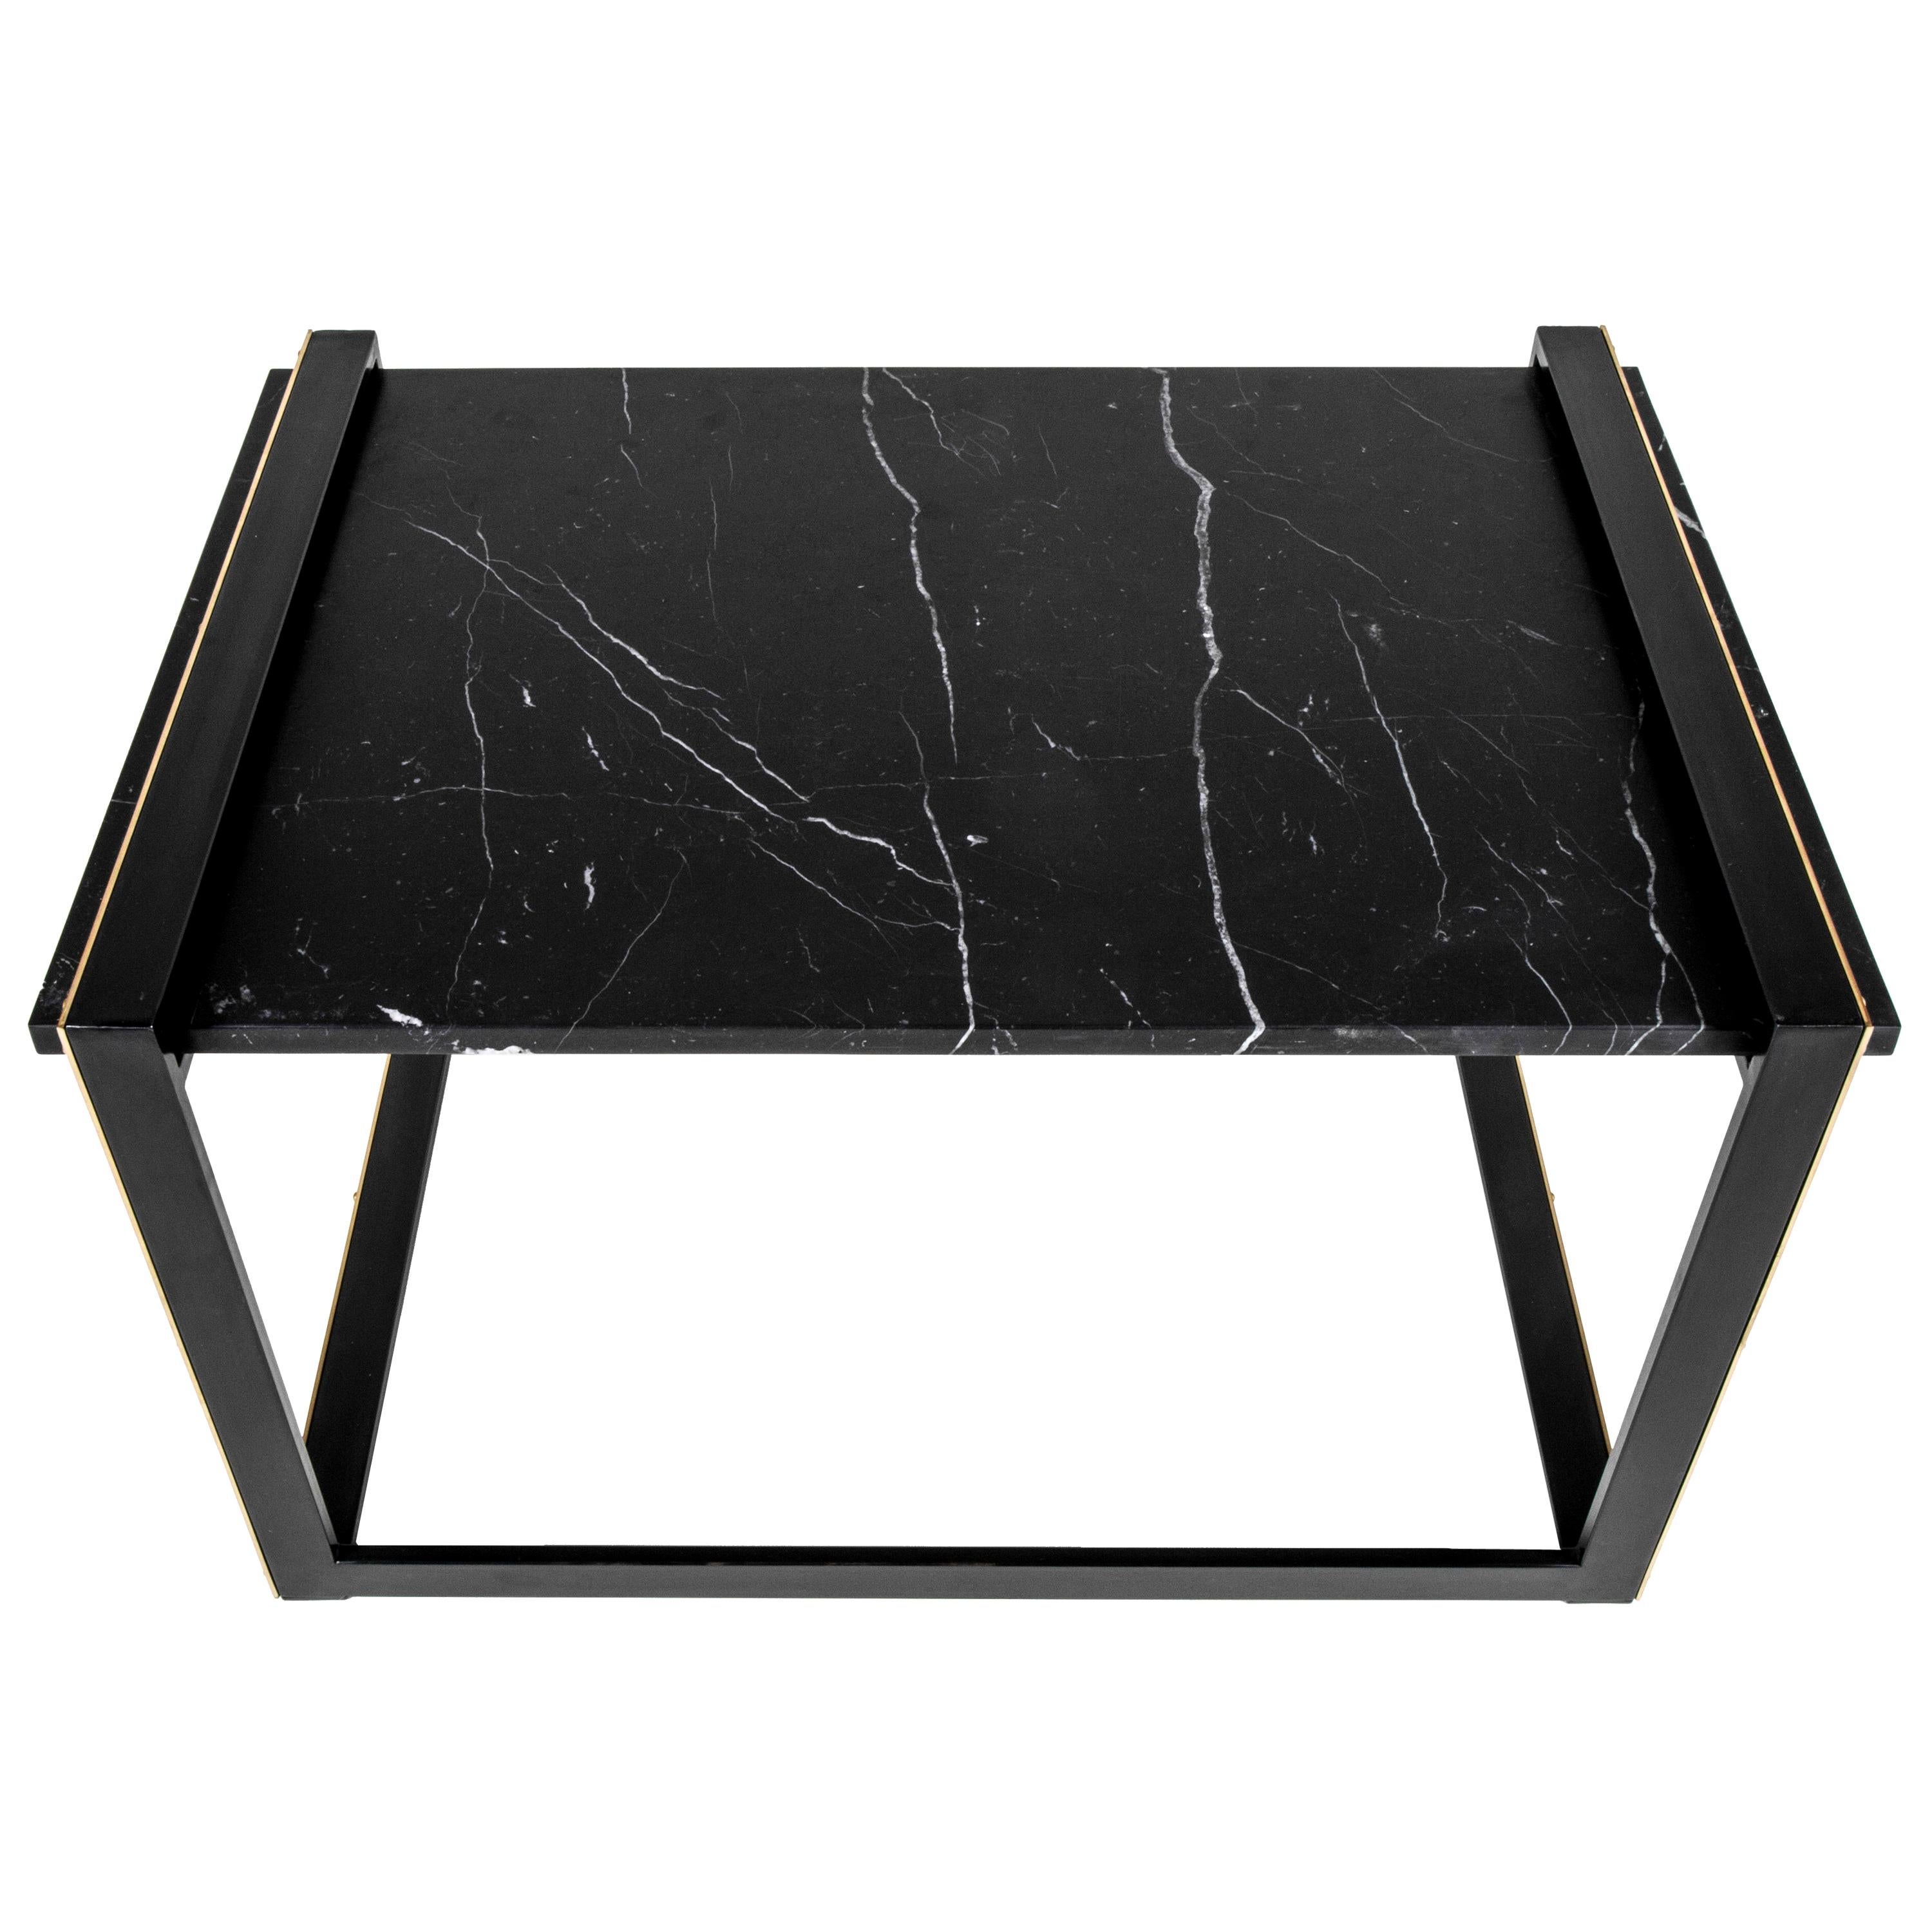 Daniel Side Table in Blackened Steel, Nero Marquina Marble and Brass Accents For Sale